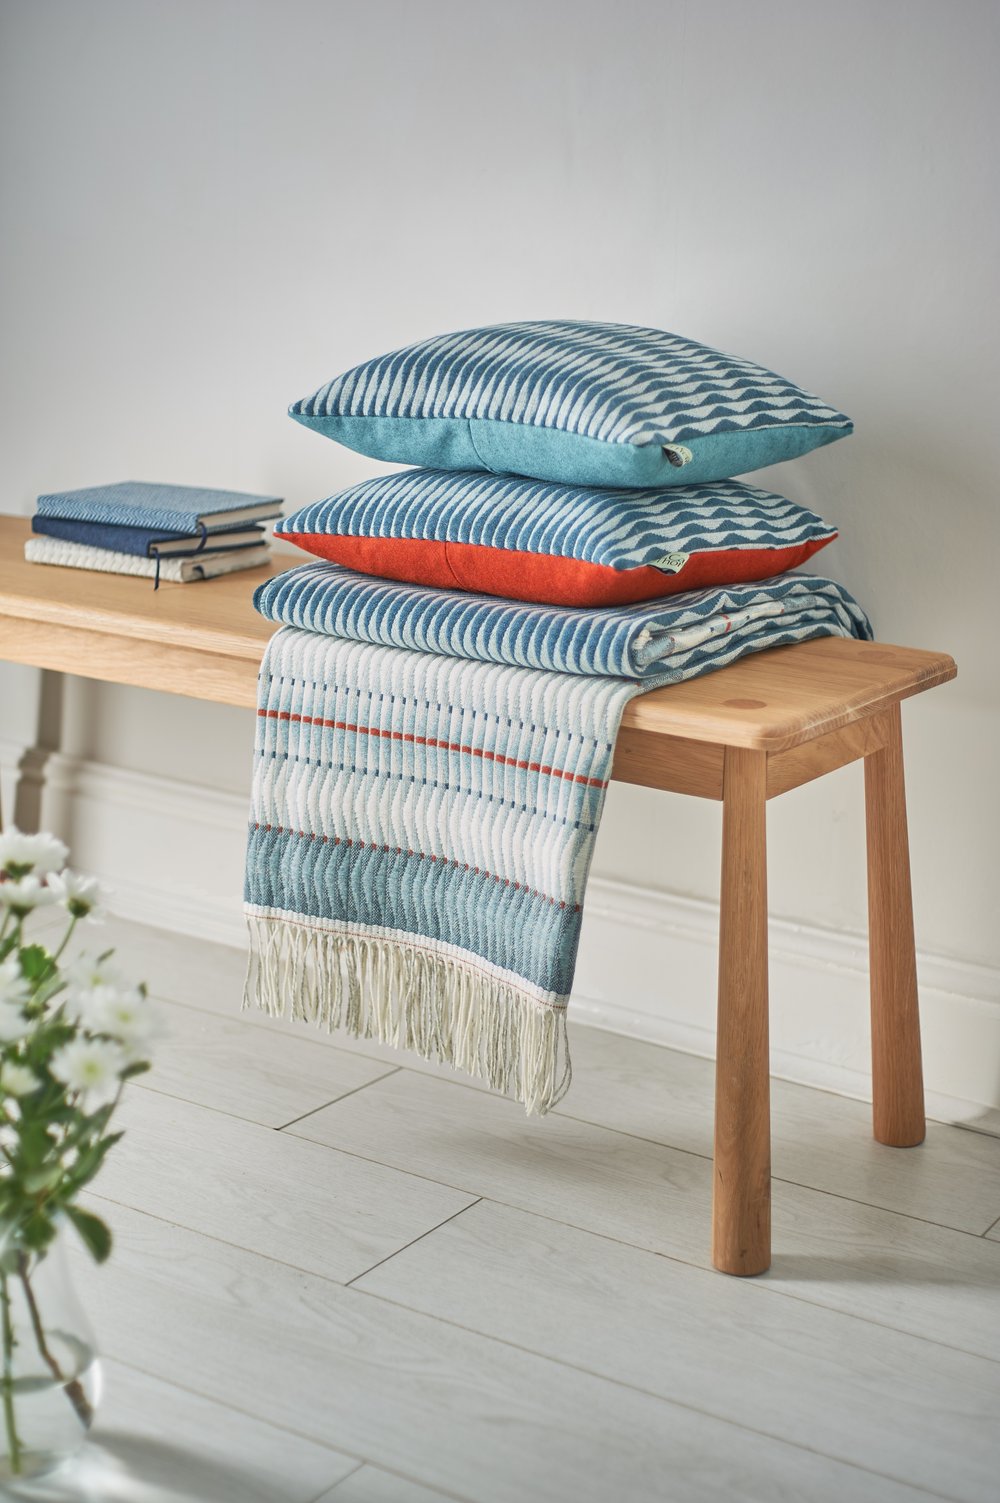  Handmade designer textiles throws cushions stacked up on top of wooden bench 